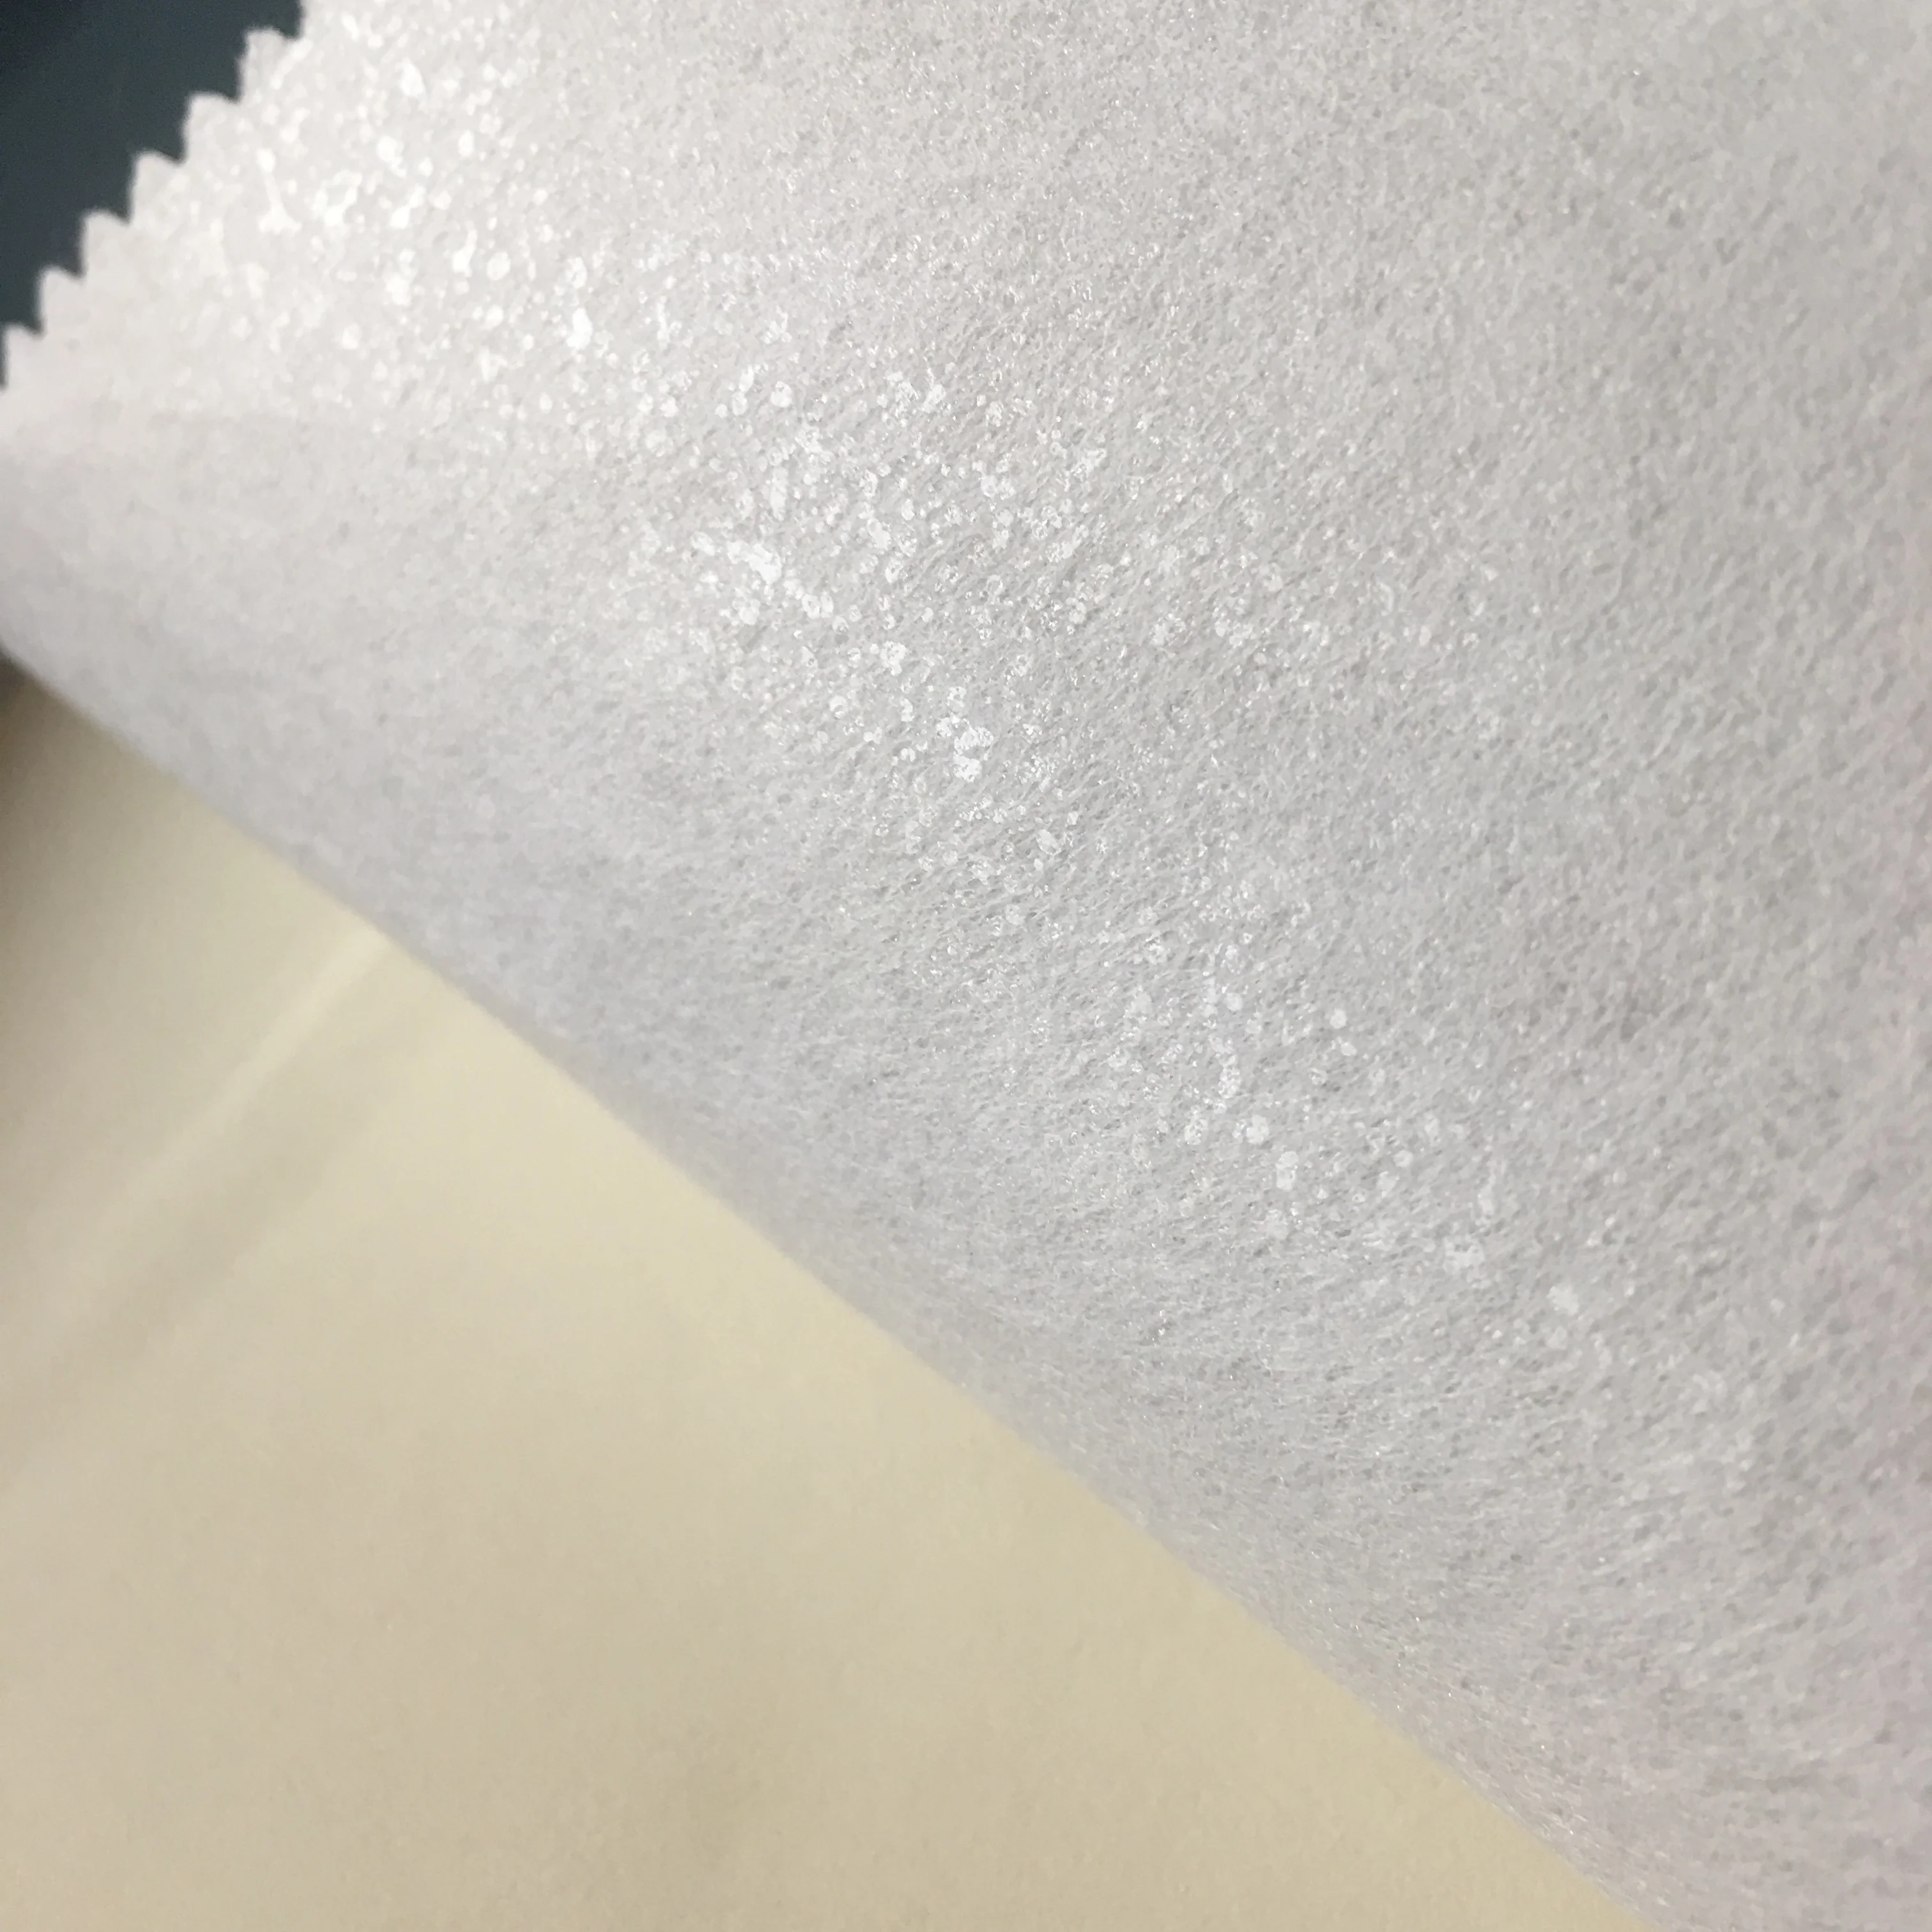 
Polyester nonwoven embroidery interlining 